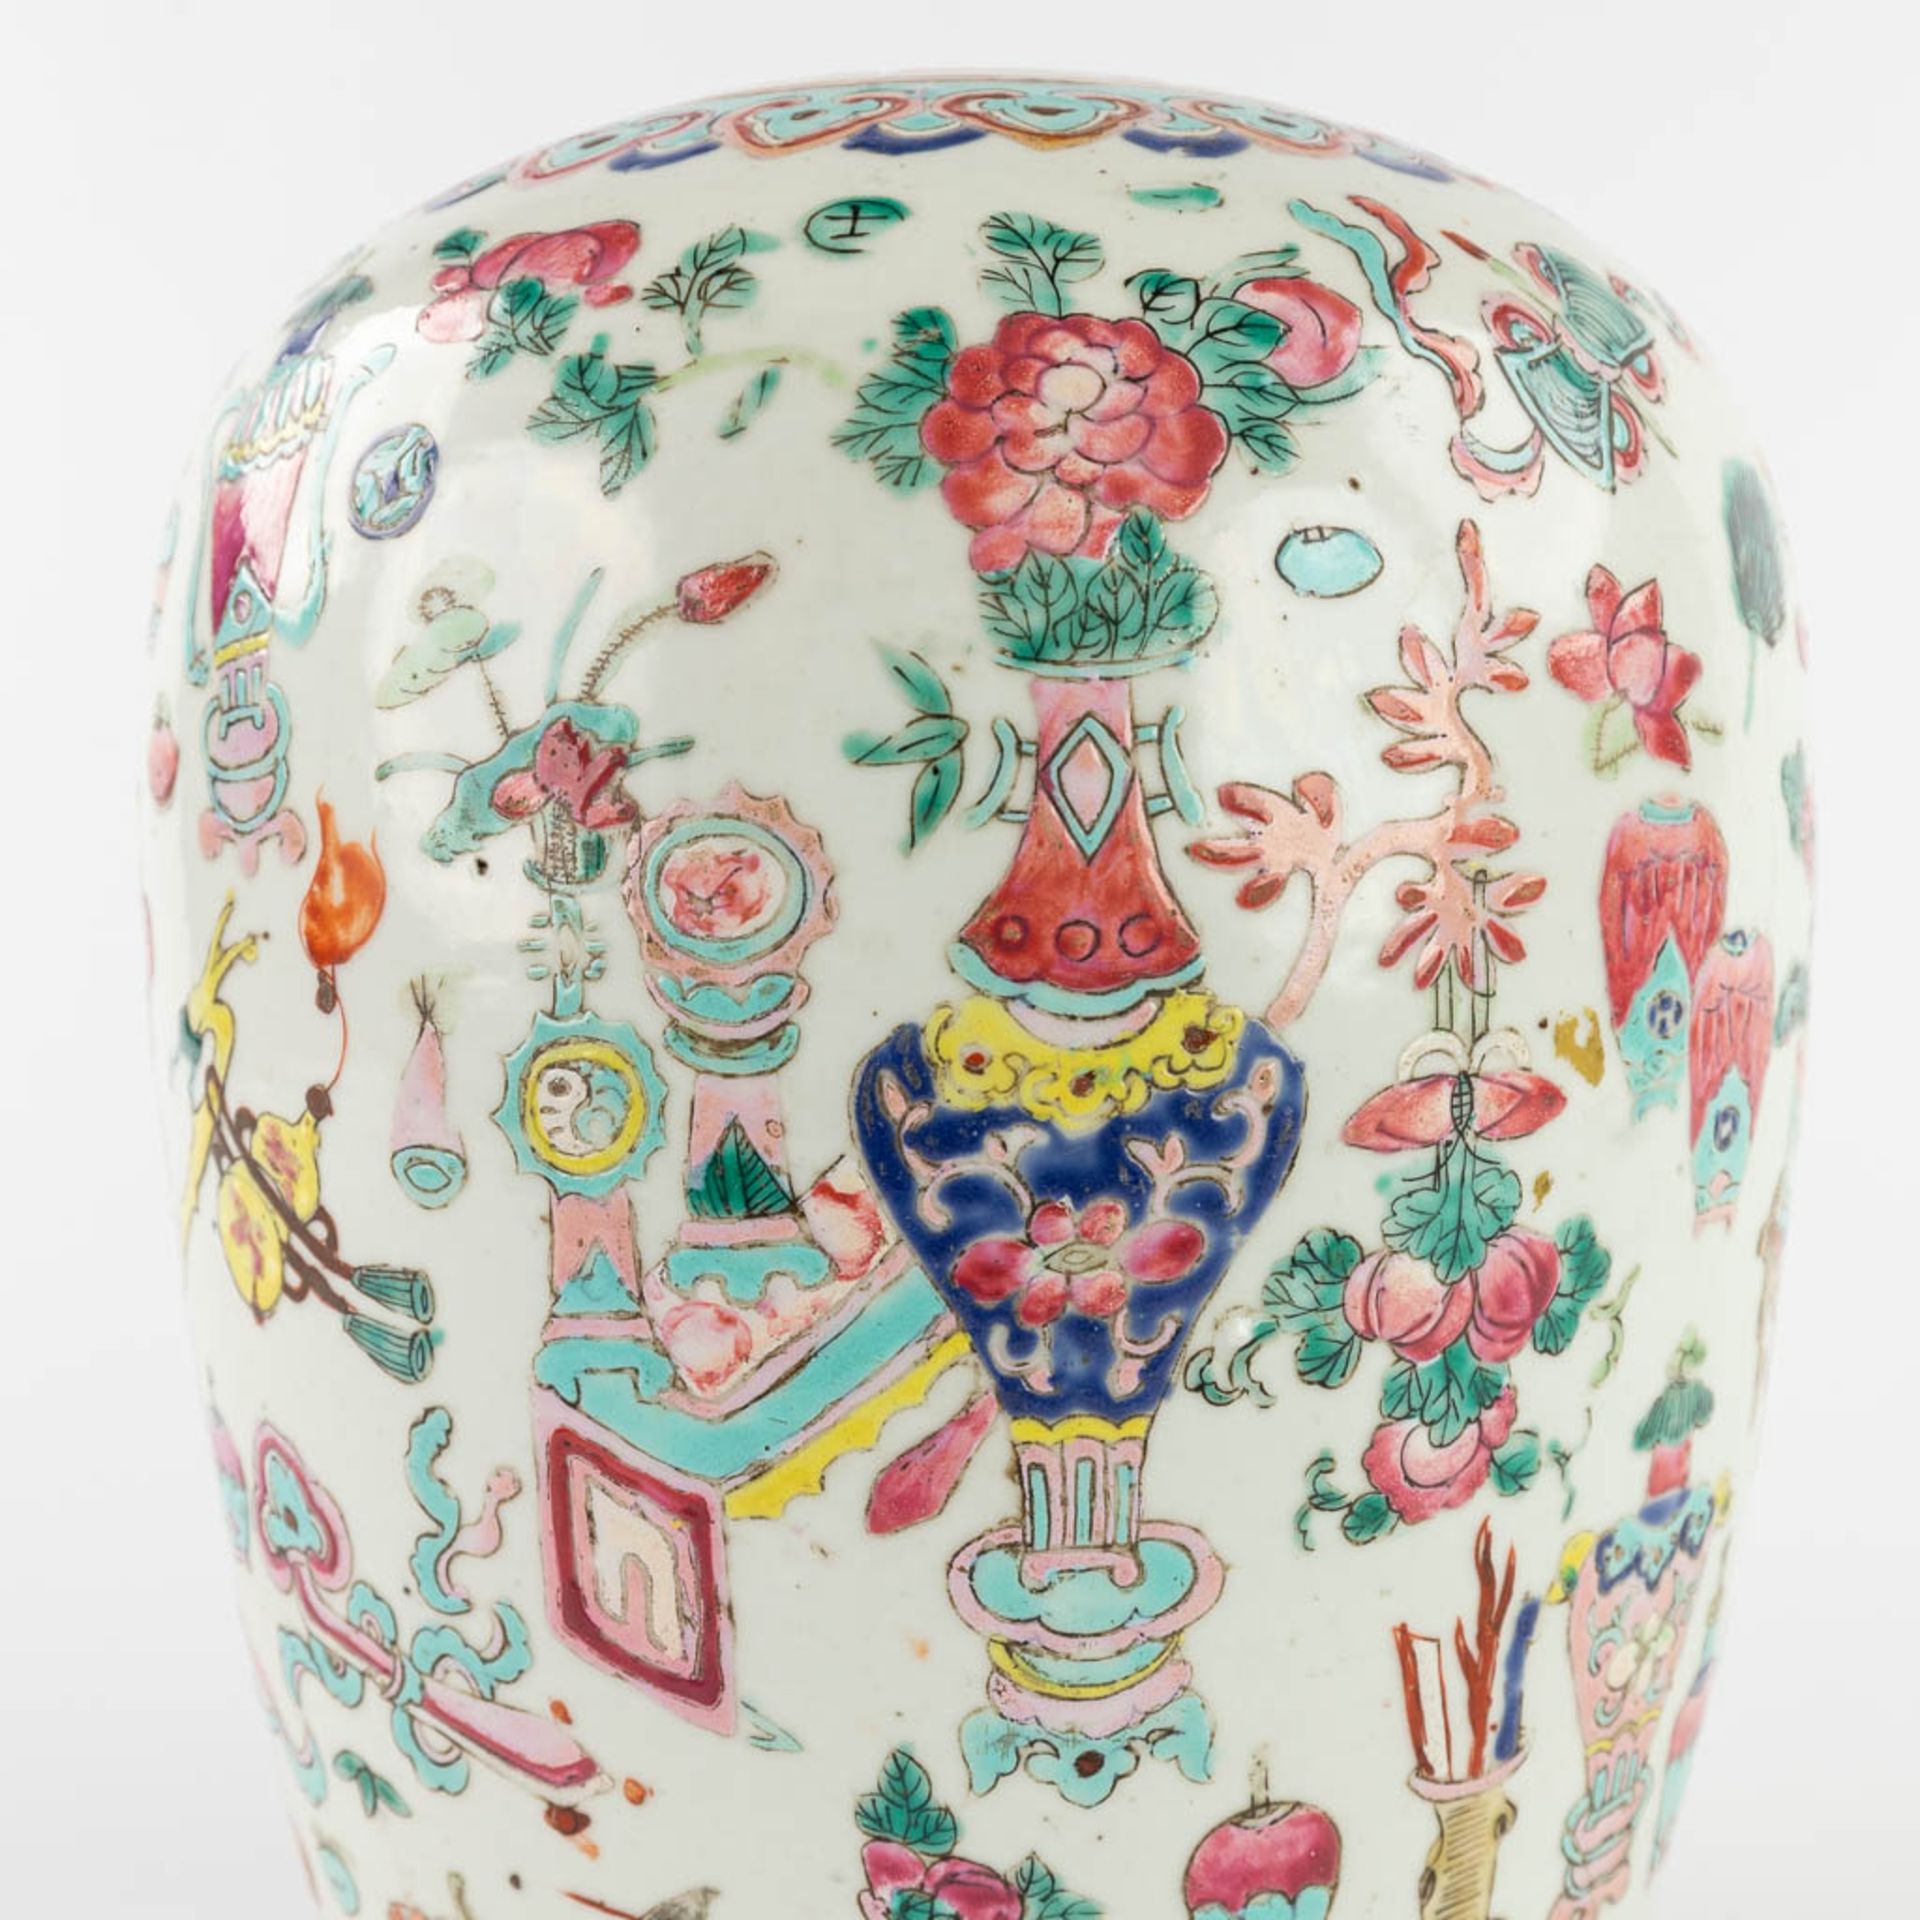 A Chinese Famille Rose ginger jar, decorated with 100 antiquities. 19th/20th C. (H:30 x D:21 cm) - Image 13 of 16